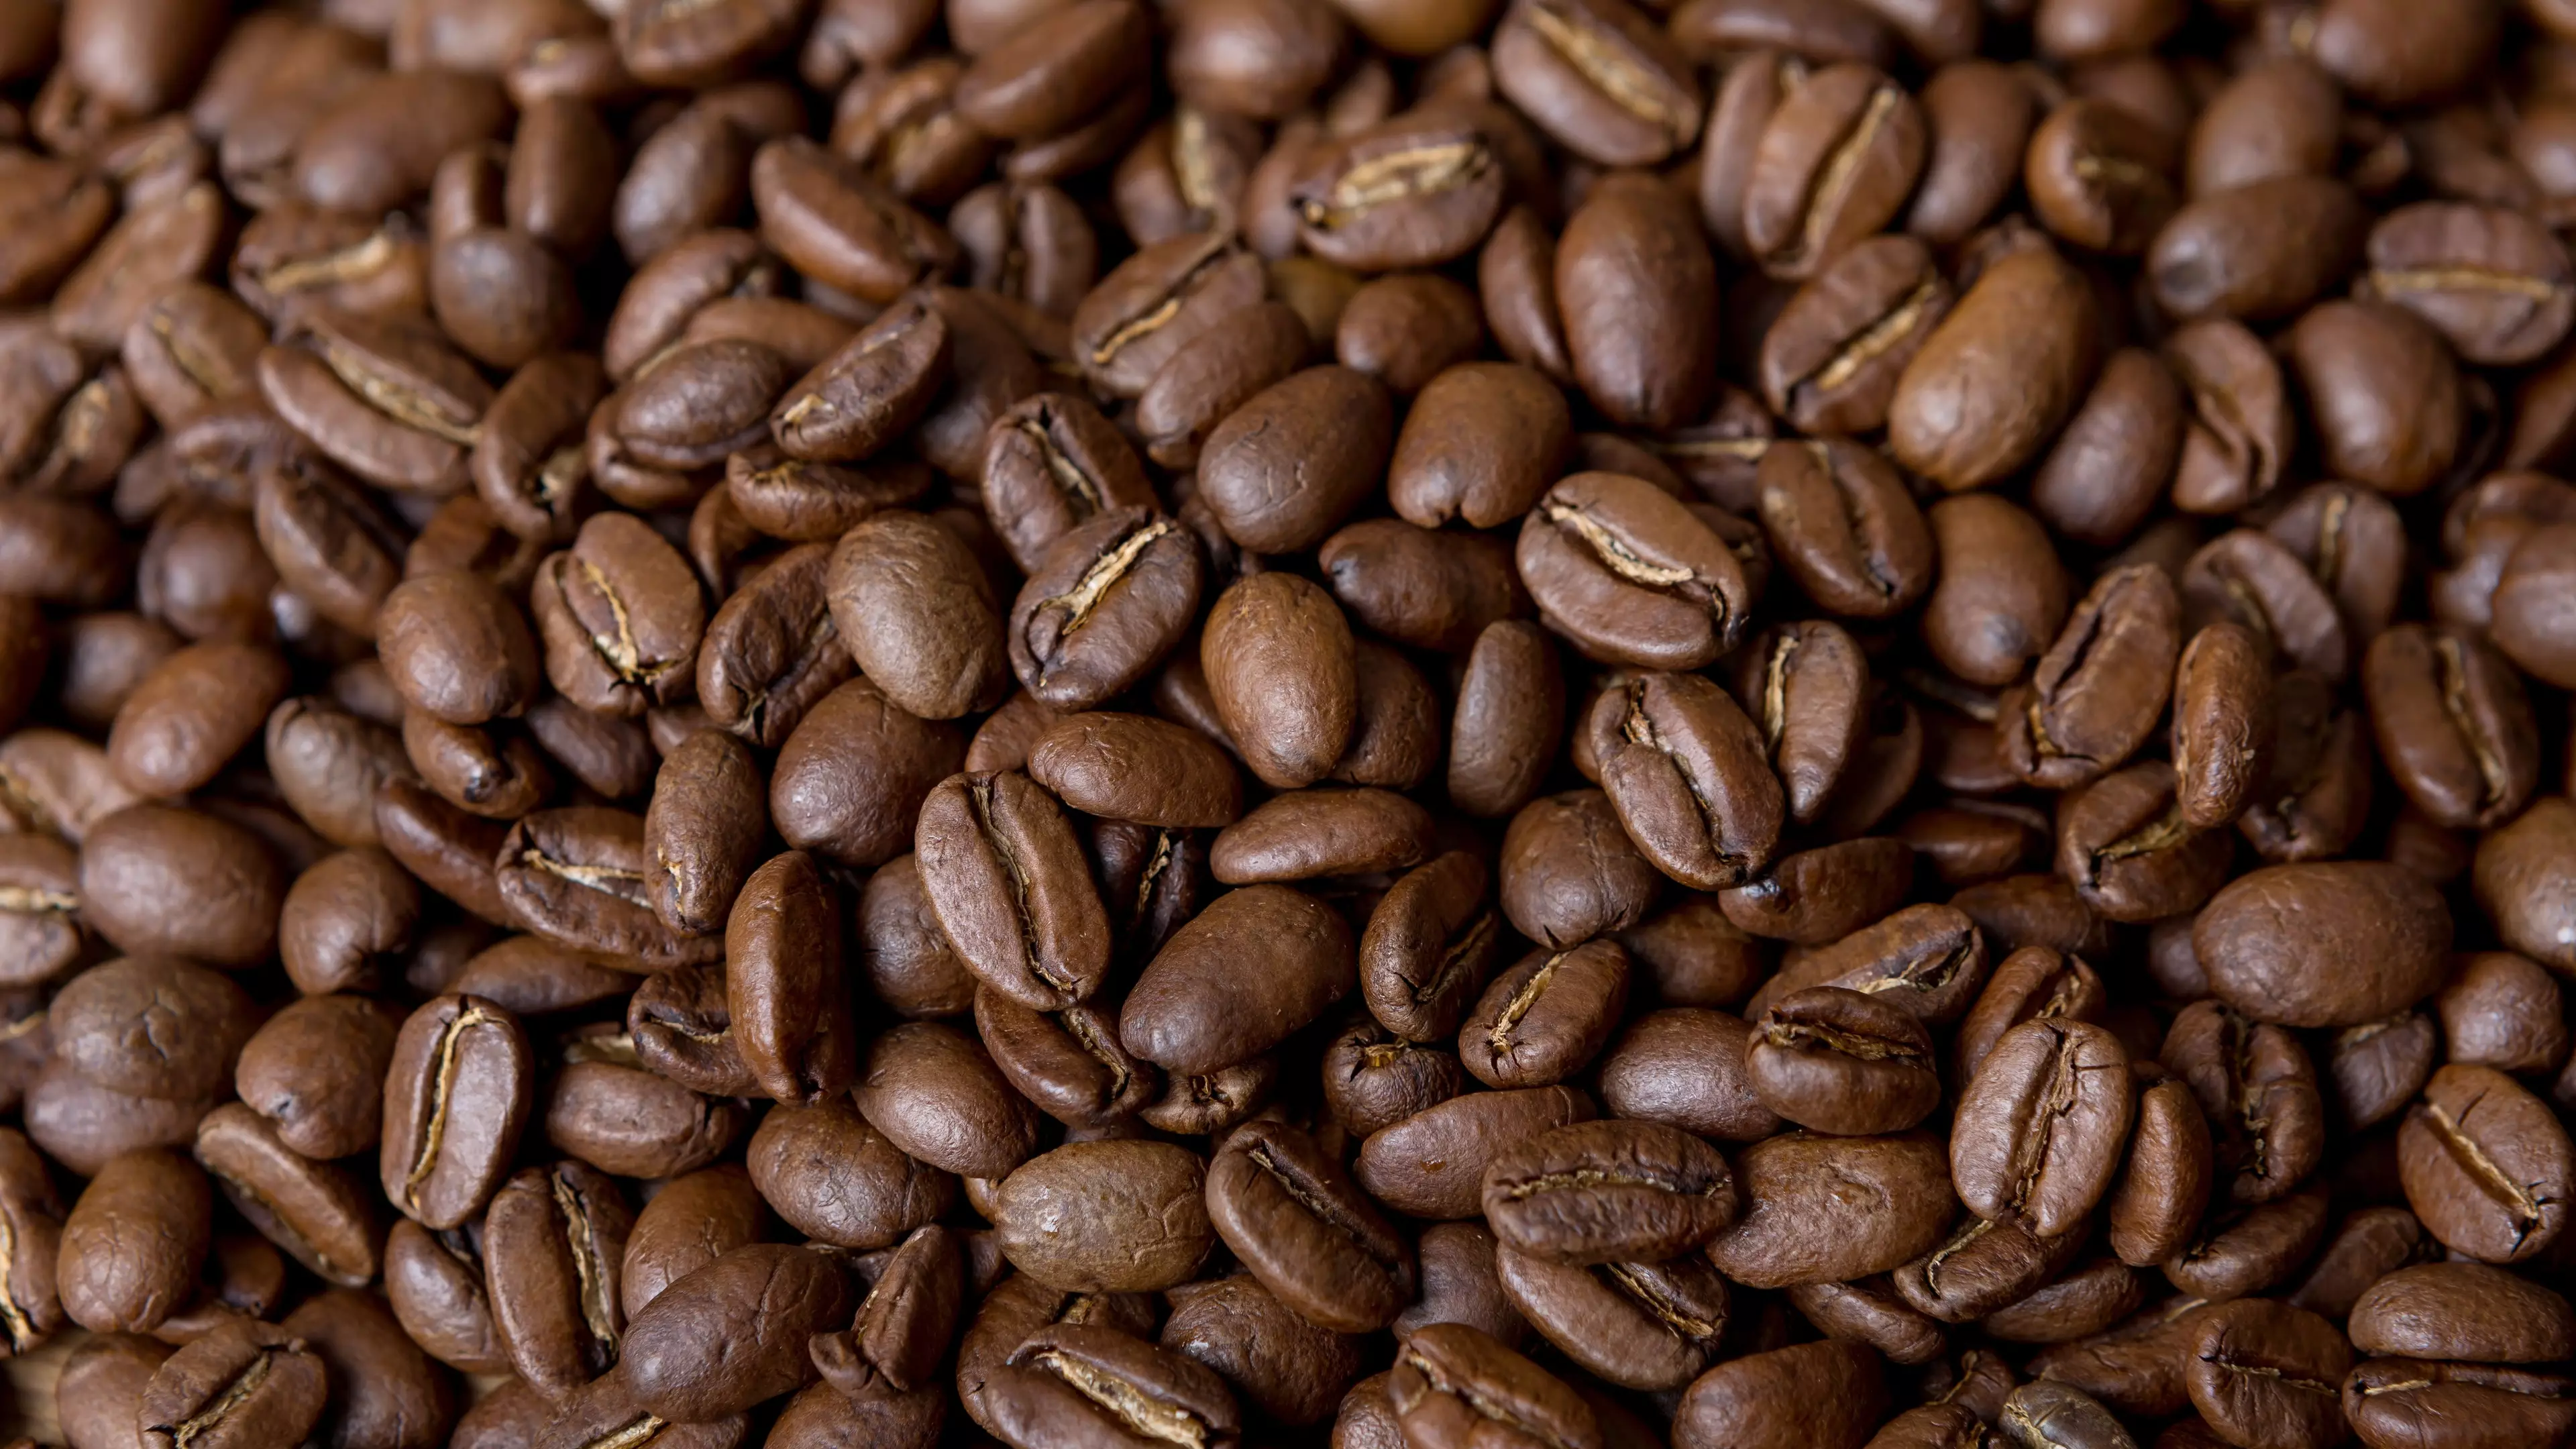 Aussie Researchers Declare There Is Such Thing As Too Much Coffee